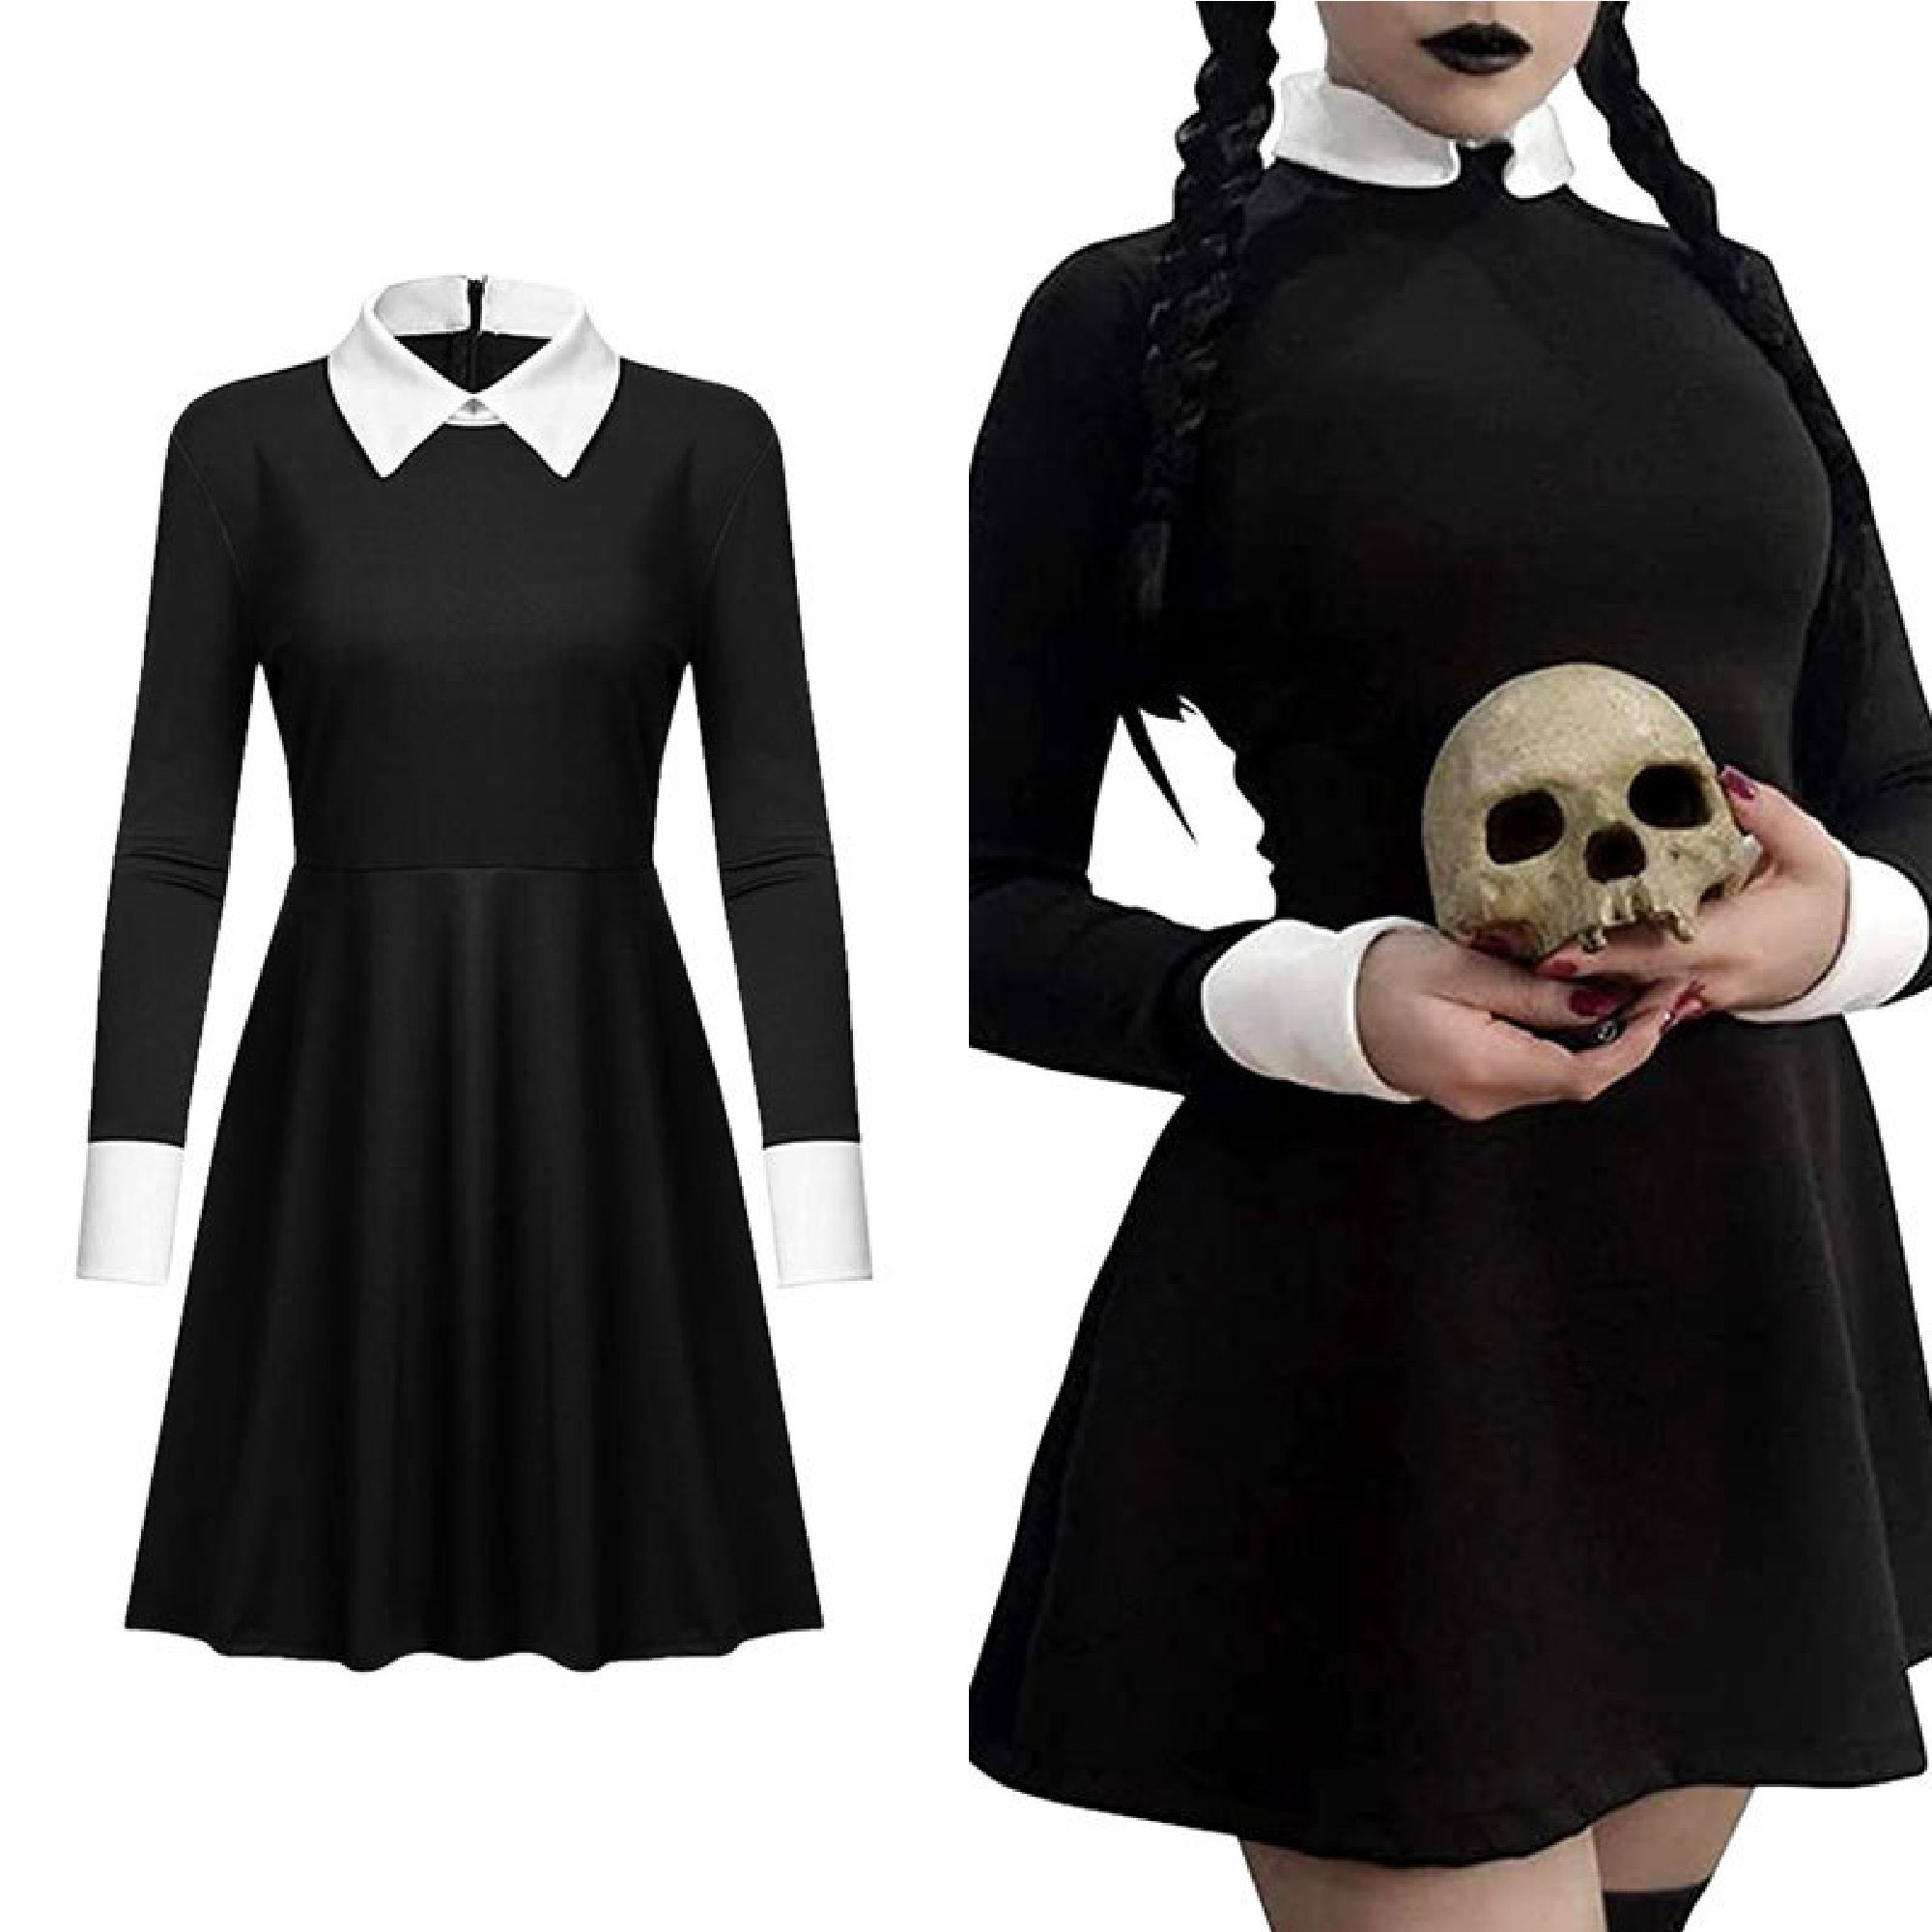 Glowing Girls Wednesday Addams Dress Costume Cosplay Halloween Outfit